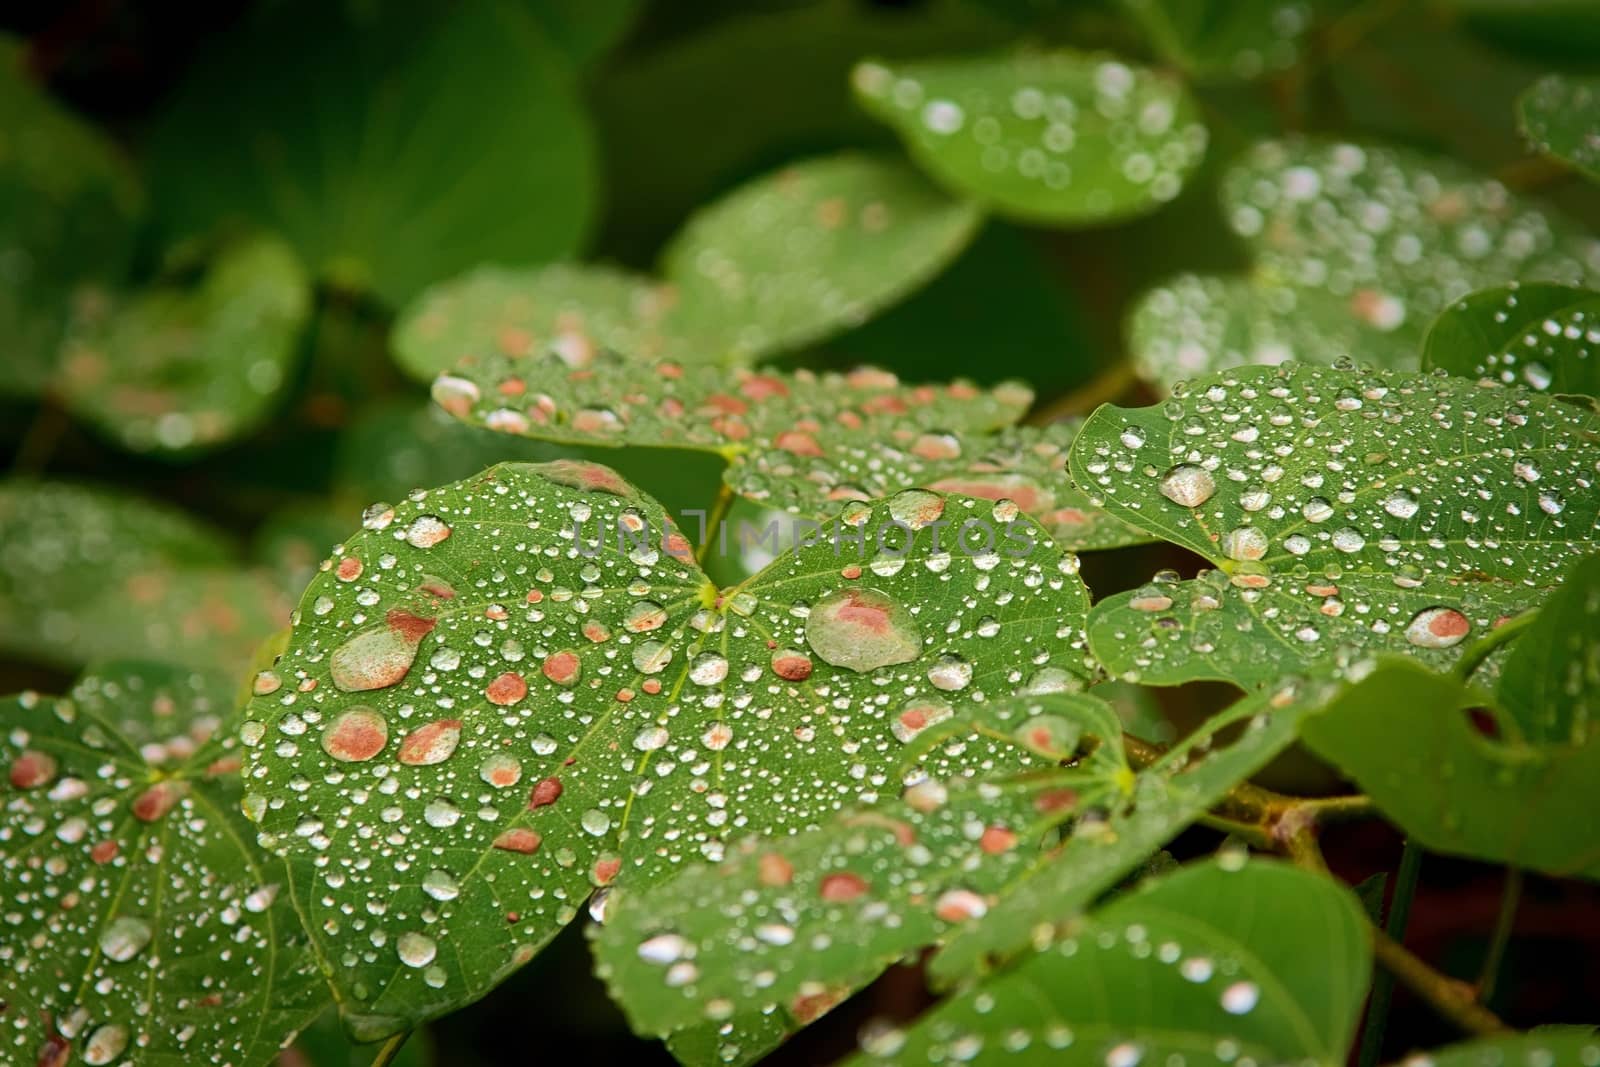 Glistening droplets over green leaves after a brief summer rain. by hernan_hyper